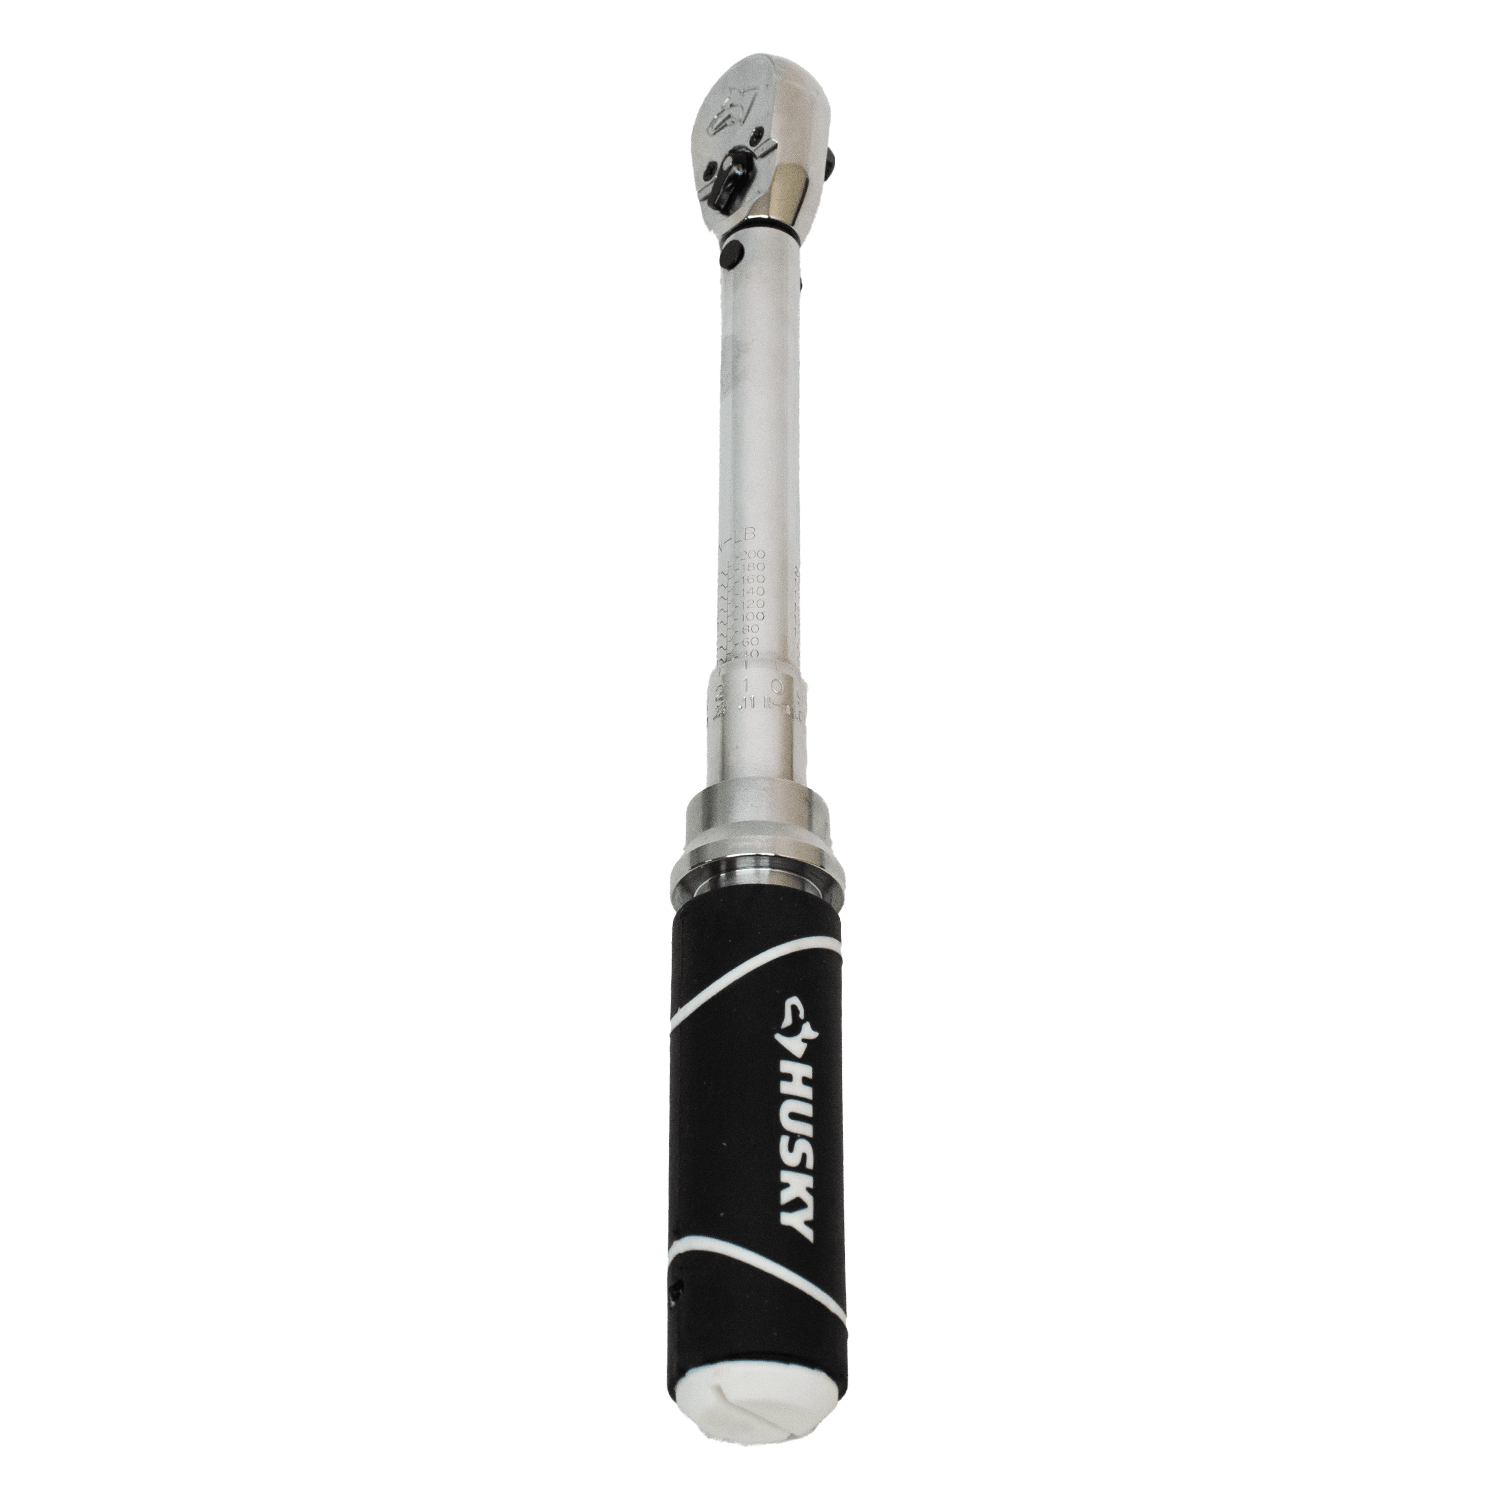 Husky 1/4in Drive Torque Wrench - 625319 - ipawnishop.com